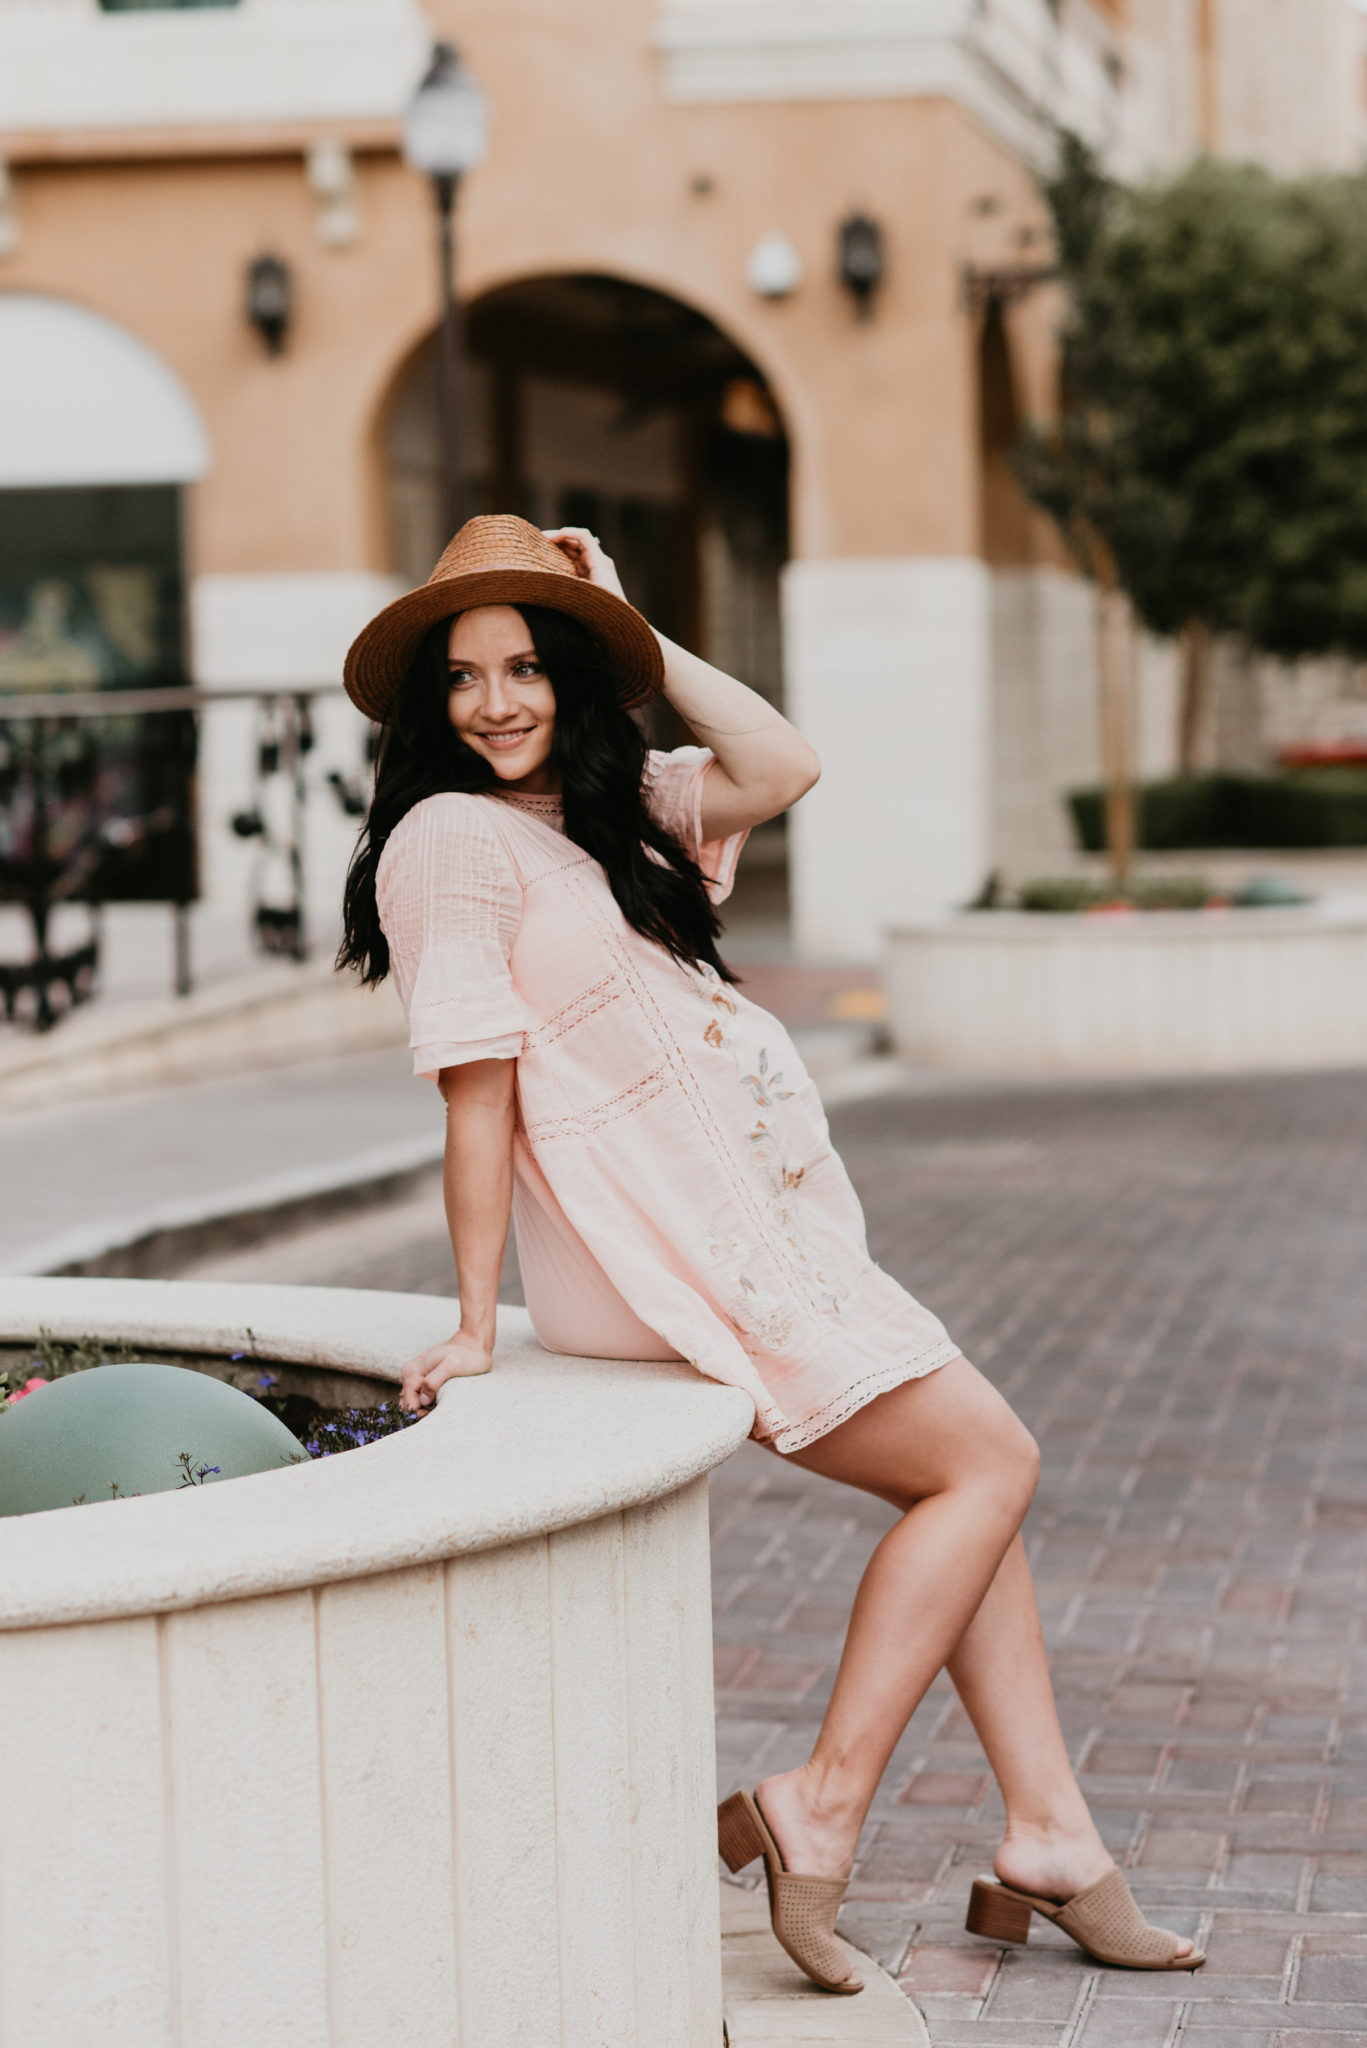 Comfortable Sandals You Can Dress Up or Down styled by popular Las Vegas fashion blogger, Outfits & Outings